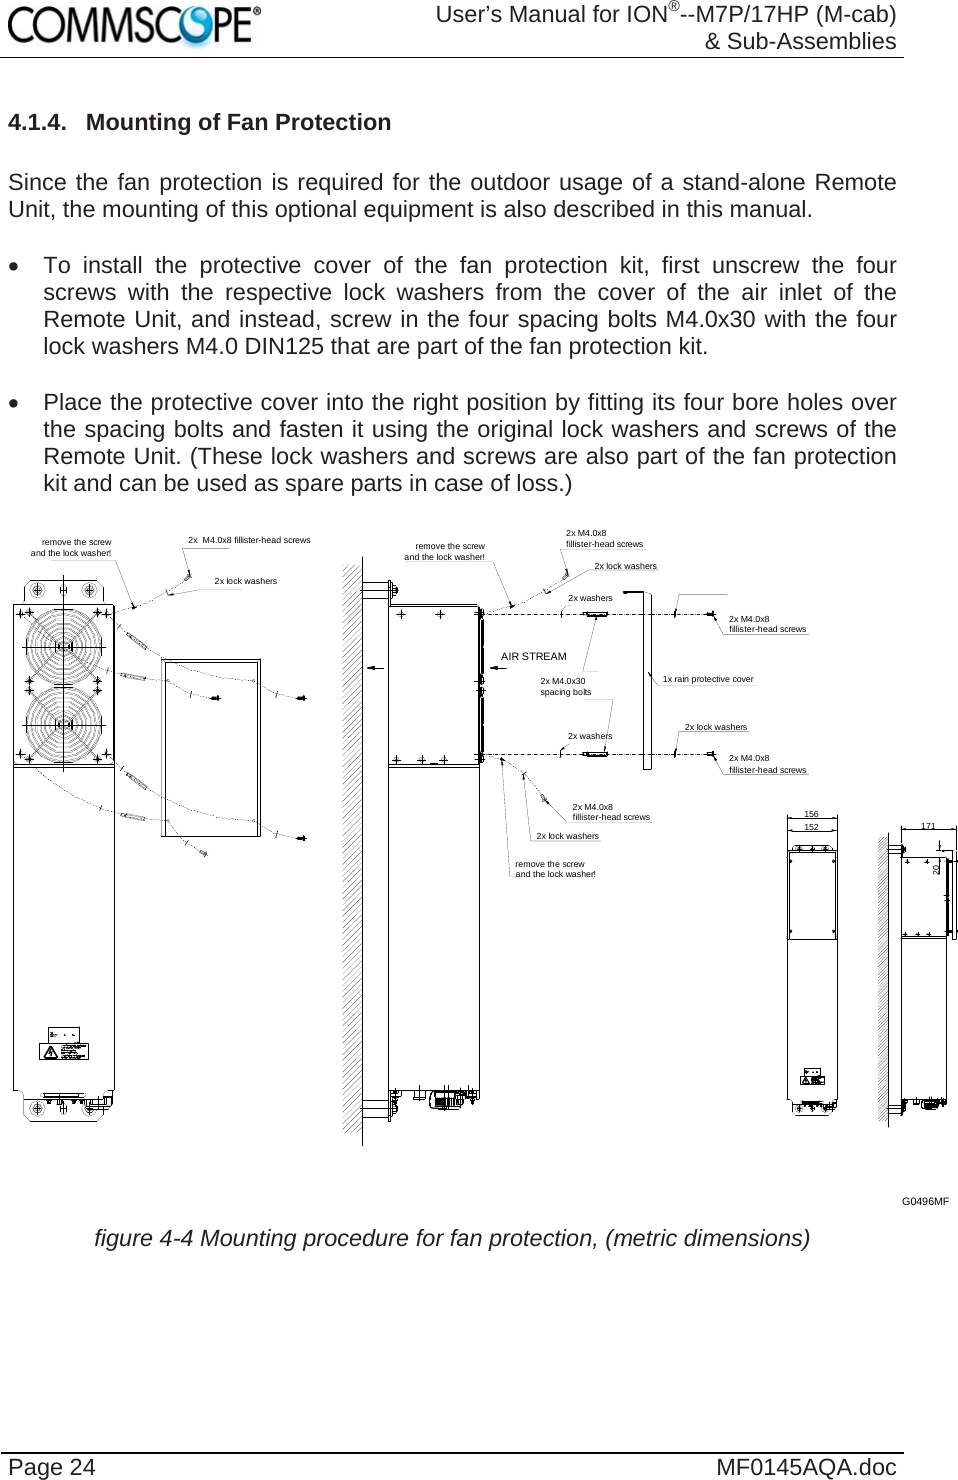  User’s Manual for ION®--M7P/17HP (M-cab) &amp; Sub-Assemblies Page 24  MF0145AQA.doc 4.1.4.  Mounting of Fan Protection  Since the fan protection is required for the outdoor usage of a stand-alone Remote Unit, the mounting of this optional equipment is also described in this manual.    To install the protective cover of the fan protection kit, first unscrew the four screws with the respective lock washers from the cover of the air inlet of the Remote Unit, and instead, screw in the four spacing bolts M4.0x30 with the four lock washers M4.0 DIN125 that are part of the fan protection kit.    Place the protective cover into the right position by fitting its four bore holes over the spacing bolts and fasten it using the original lock washers and screws of the Remote Unit. (These lock washers and screws are also part of the fan protection kit and can be used as spare parts in case of loss.)  2x M4.0x8fillister-head screws2x lock washersremove the screwand the lock washer!2x lock washers2x M4.0x8fillister-head screwsremove the screwand the lock washer!2x M4.0x8fillister-head screws1x rain protective cover2x lock washers2x M4.0x8fillister-head screws2x  M4.0x8 fillister-head screws2x lock washersremove the screwand the lock washer!2x washers2x washers156152 17120AIR STREAM2x M4.0x30spacing boltsG0496MF  figure 4-4 Mounting procedure for fan protection, (metric dimensions)  